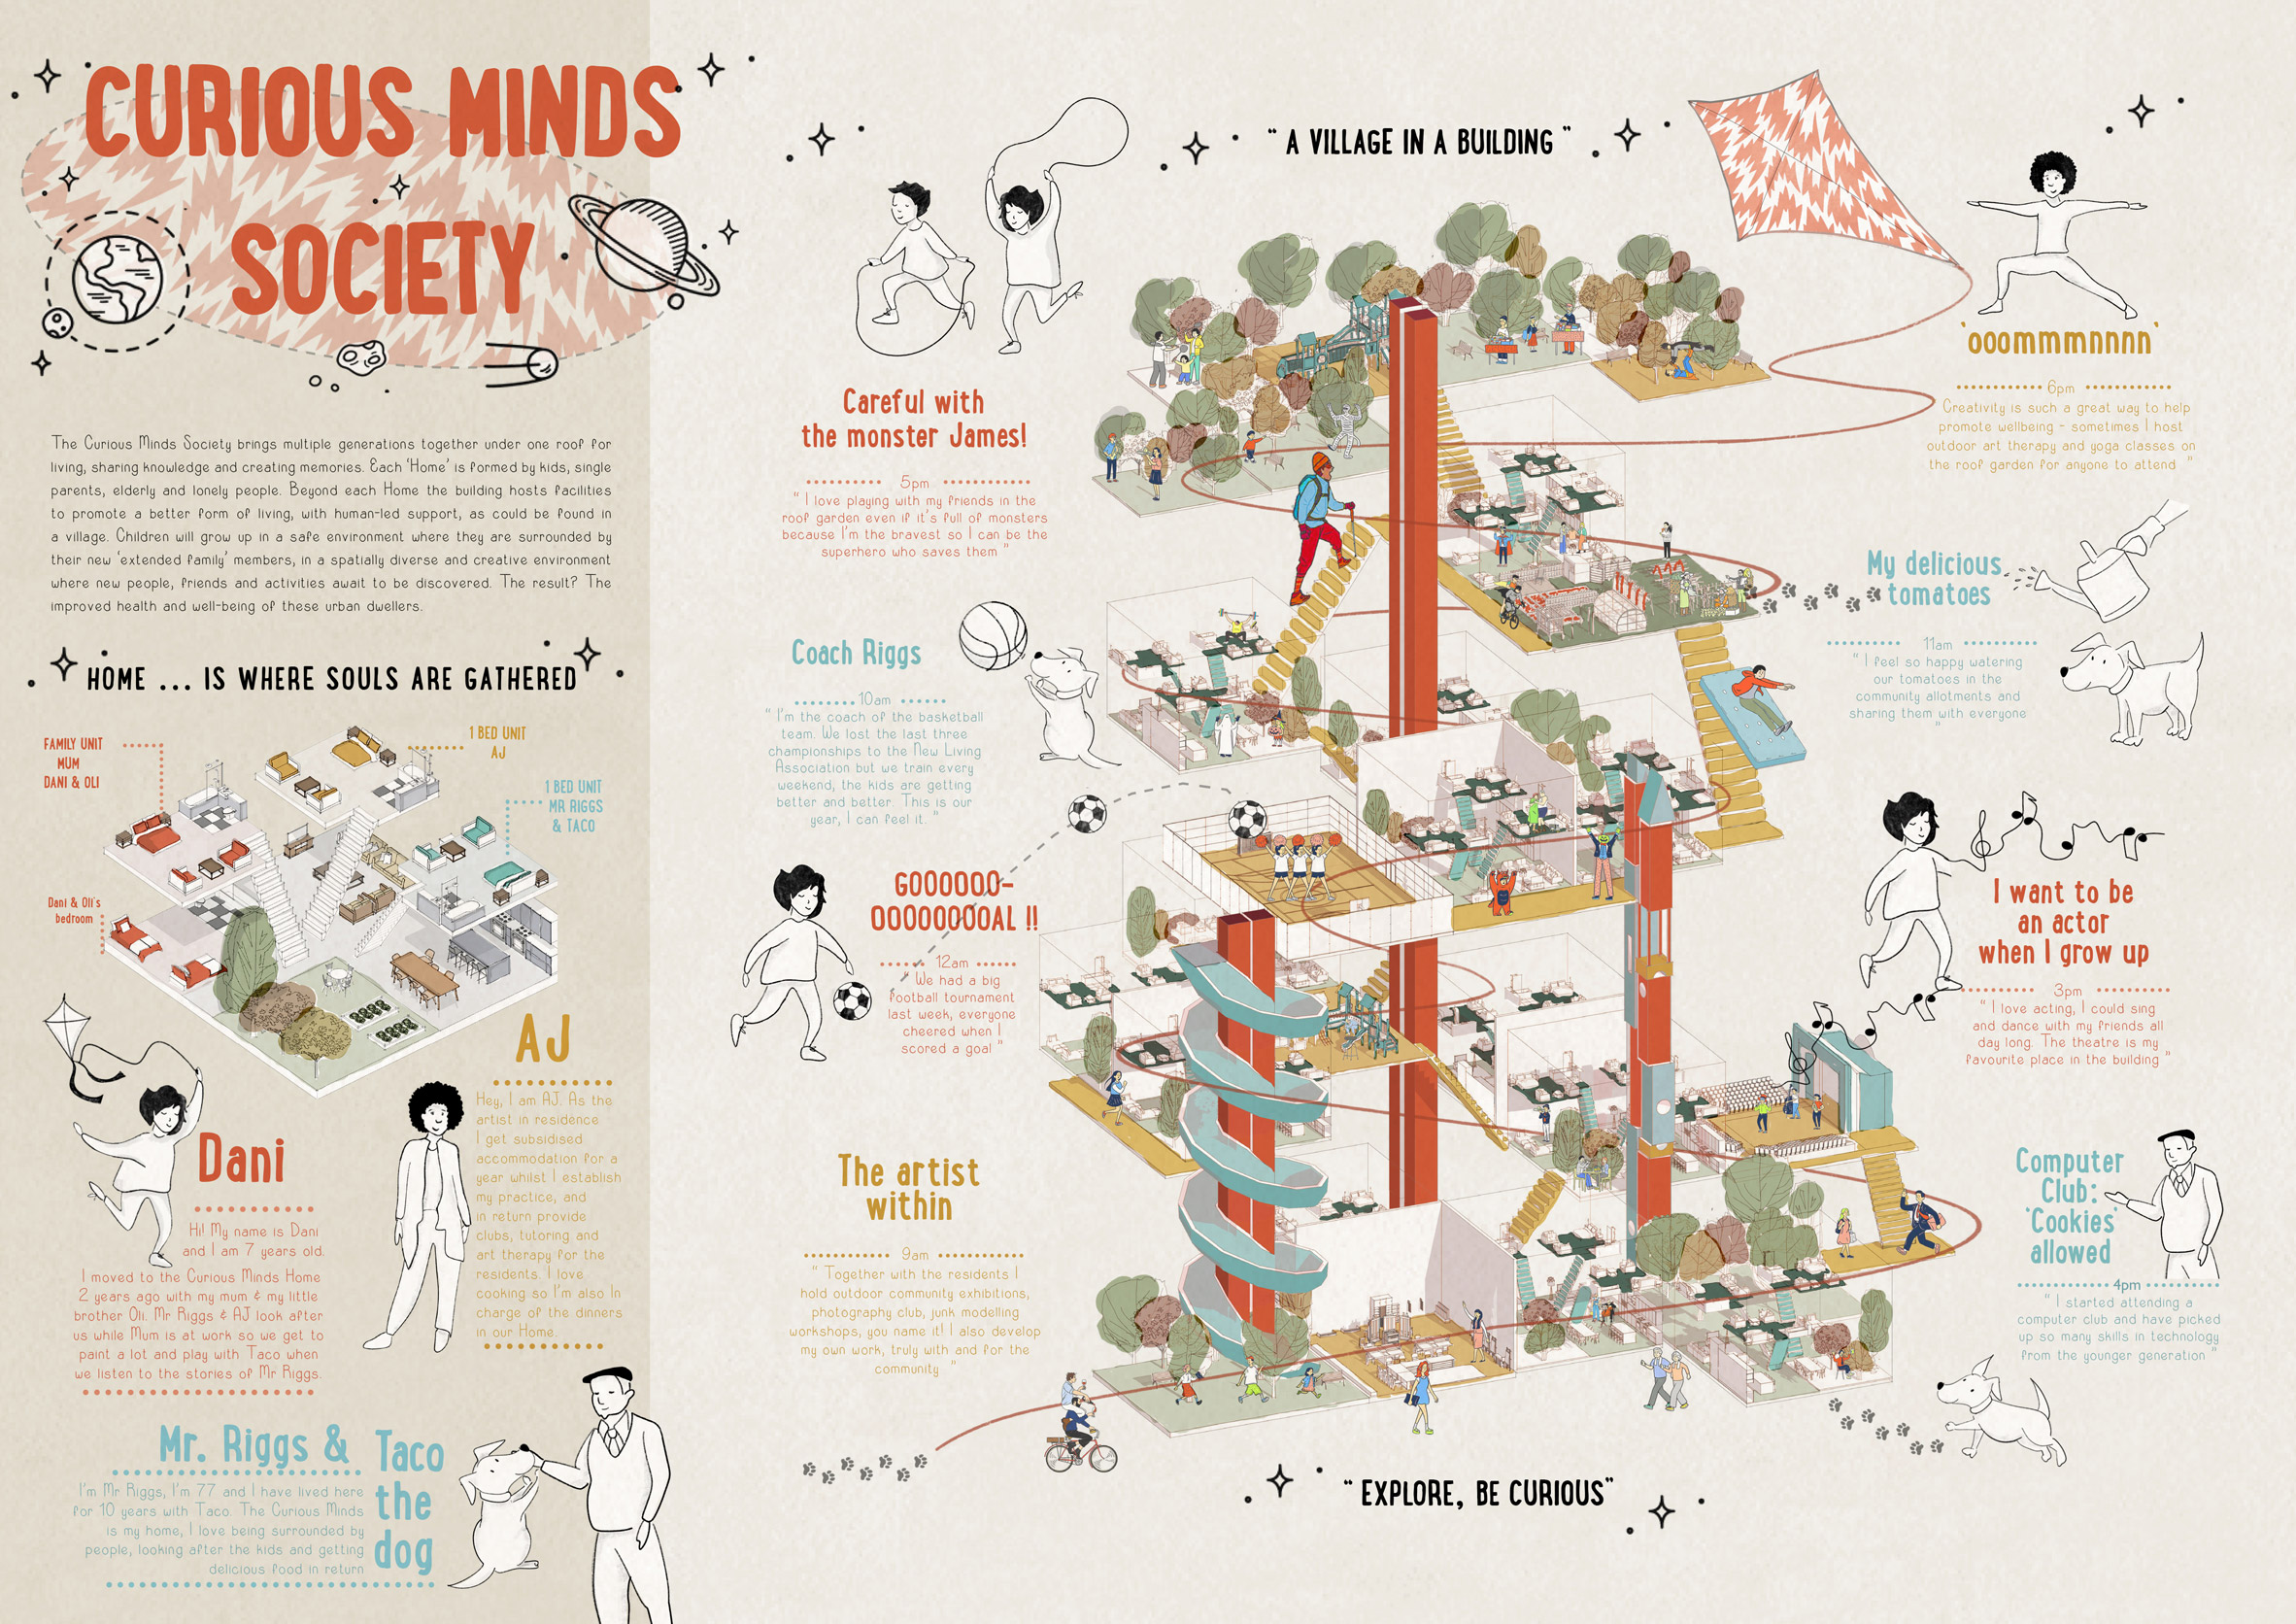 Curious Minds Society proposal by Child Graddon Lewis, Split, Eley Kishimoto and Hungry Sandwich